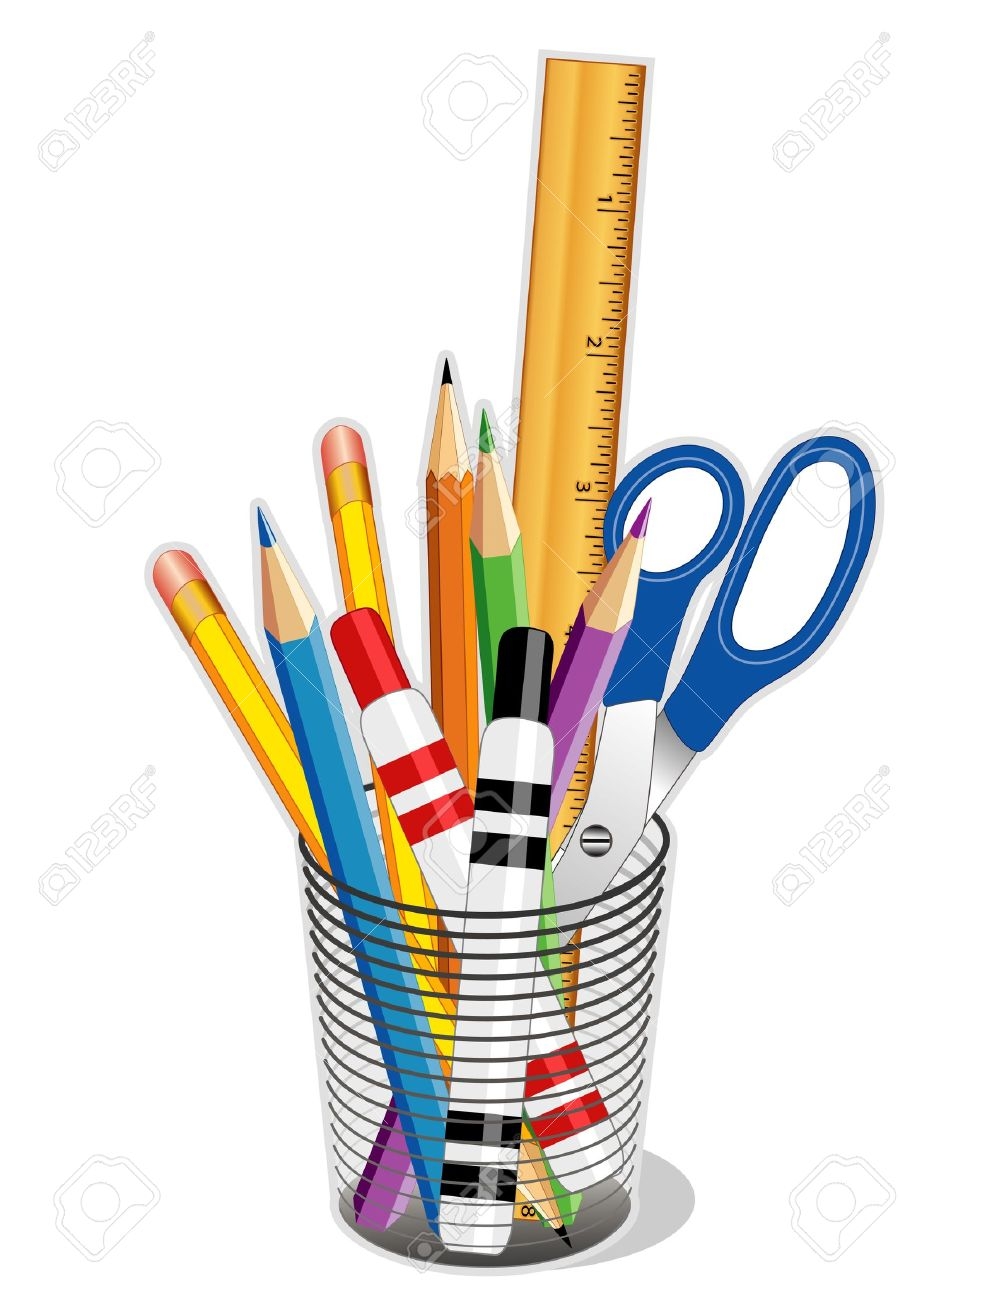 Writing Tools Clipart.